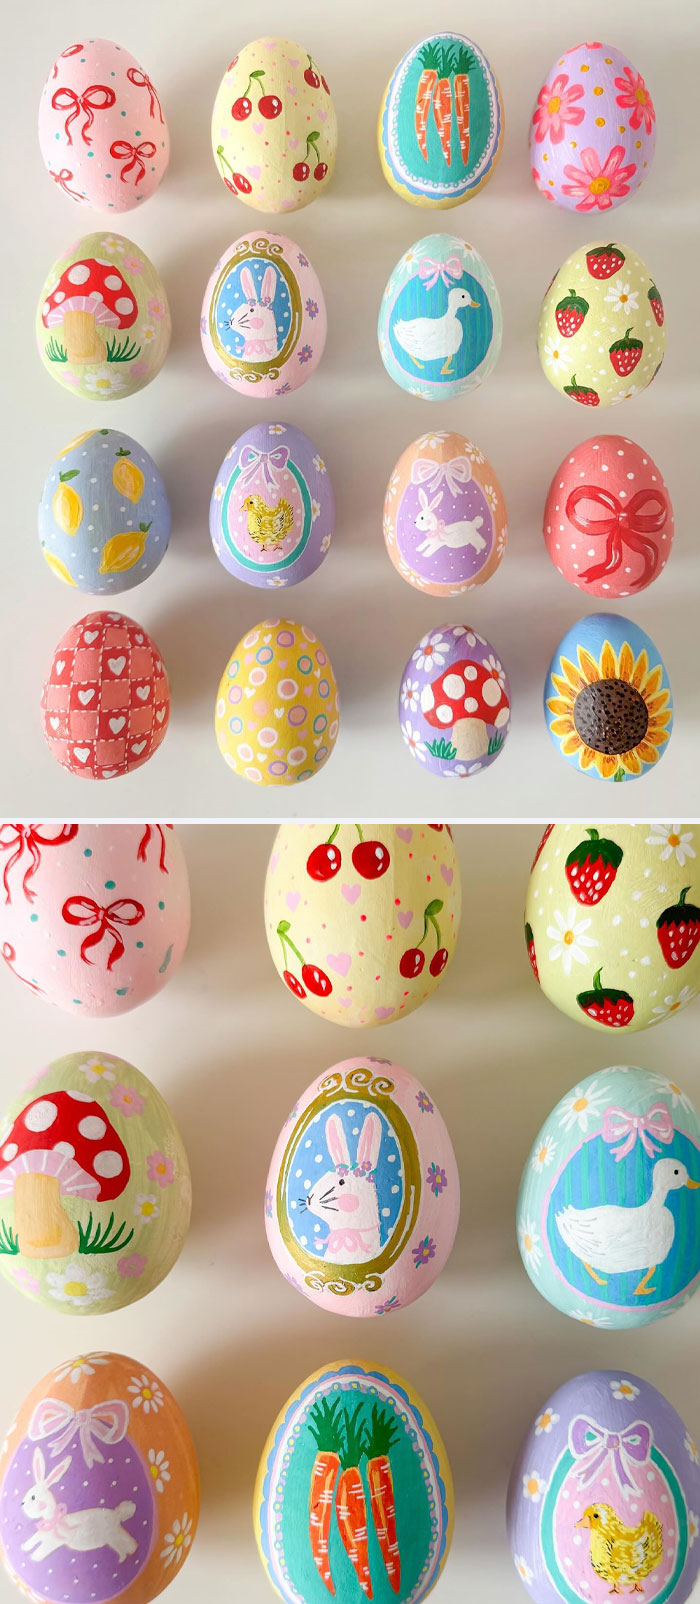 I Started Painting These Ceramic Eggs And Couldn't Stop